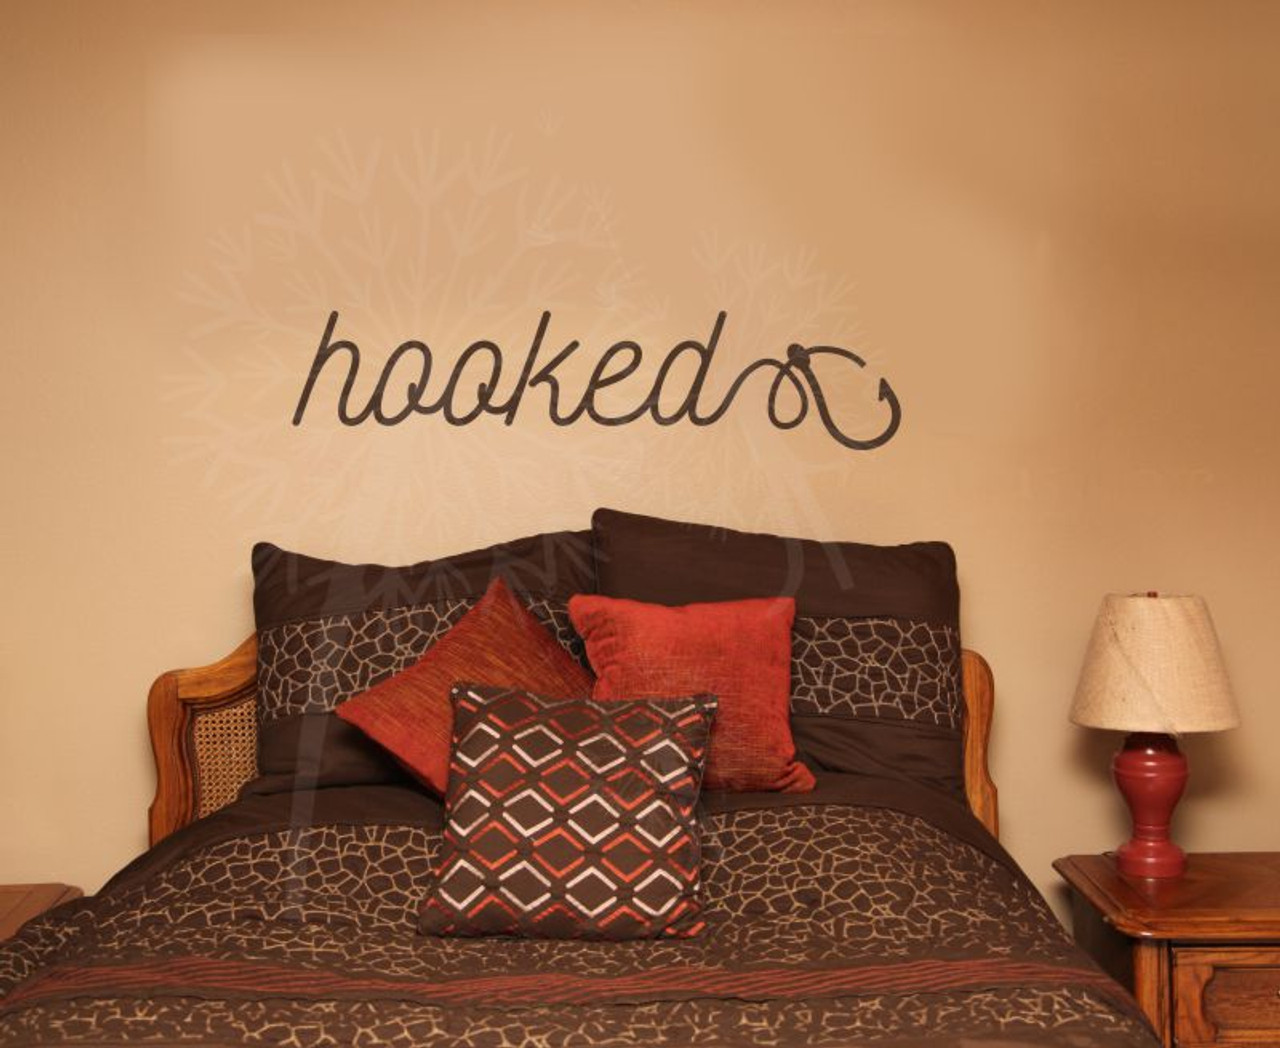 Hooked Cursive Lettering with Fish Hook Fisherman Wall Art Decals Words